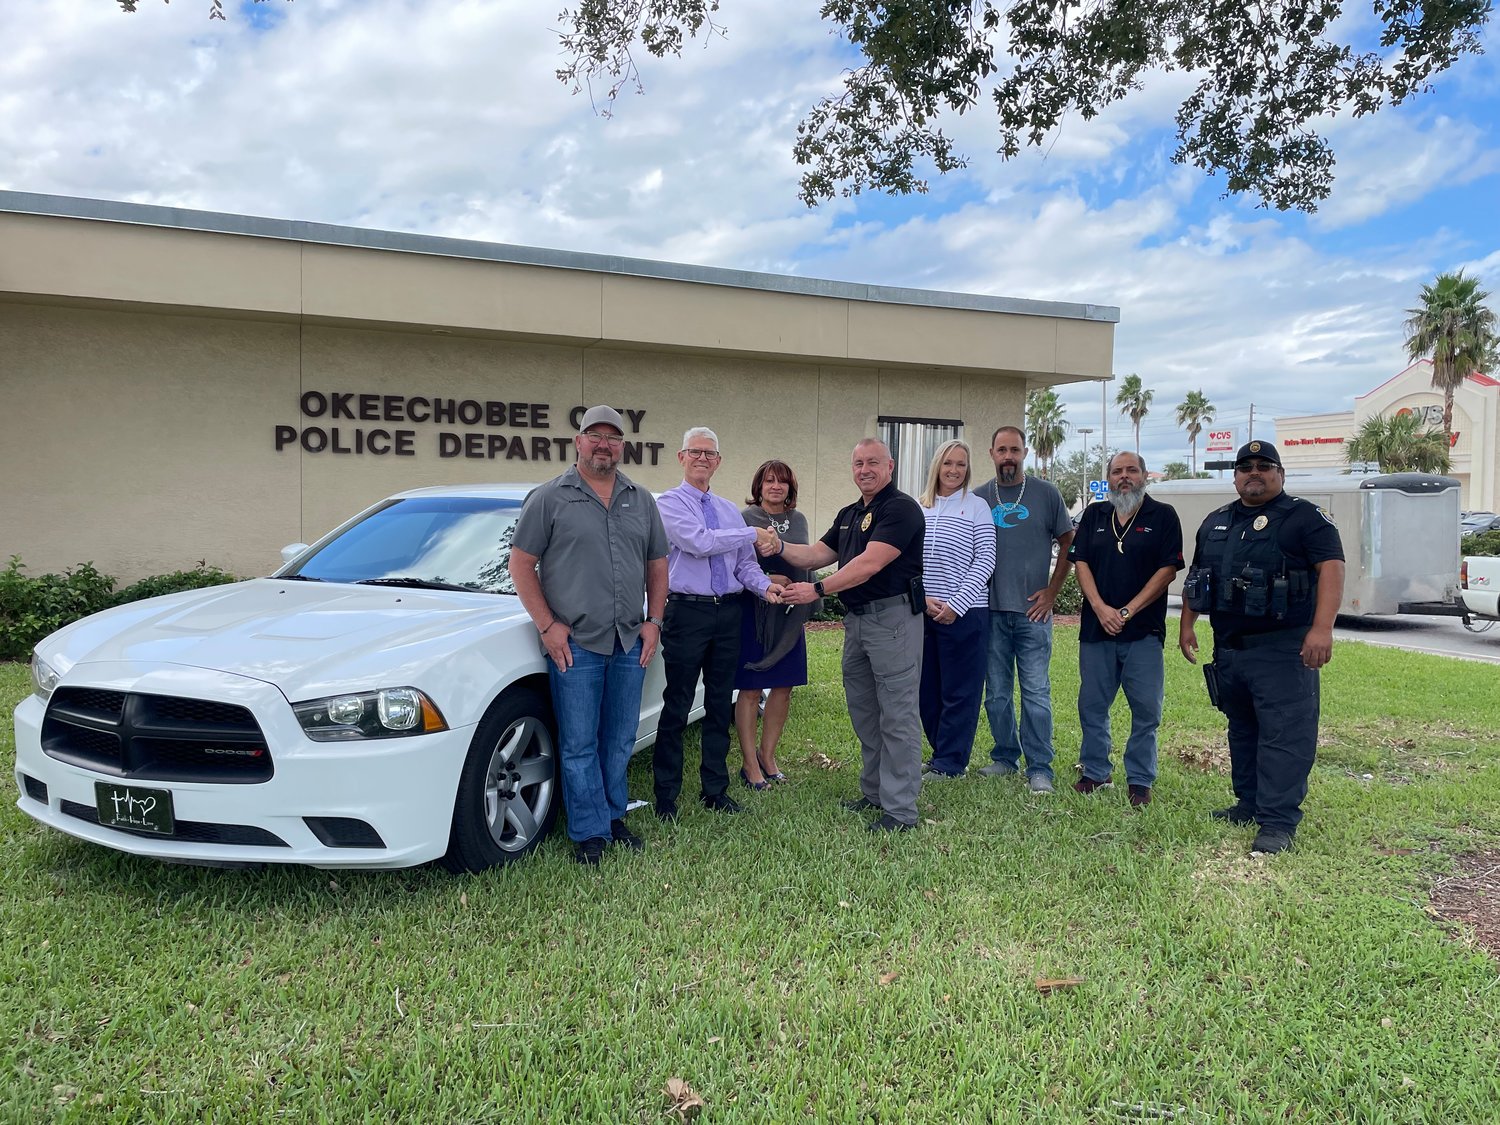 Okeechobee City Police Department donated a surplus patrol car to Martha's House this week. Pictured are (L to R) David McCormick (Tire Zone), Jonathan Bean (Martha's House), Edna Malagon (Martha's House), Chief Donald Hagan, Shayne Clayville and Hank Soler (Soler Automotive), Jose Luna (Luna Window tint and Lt. Belen Reyna.